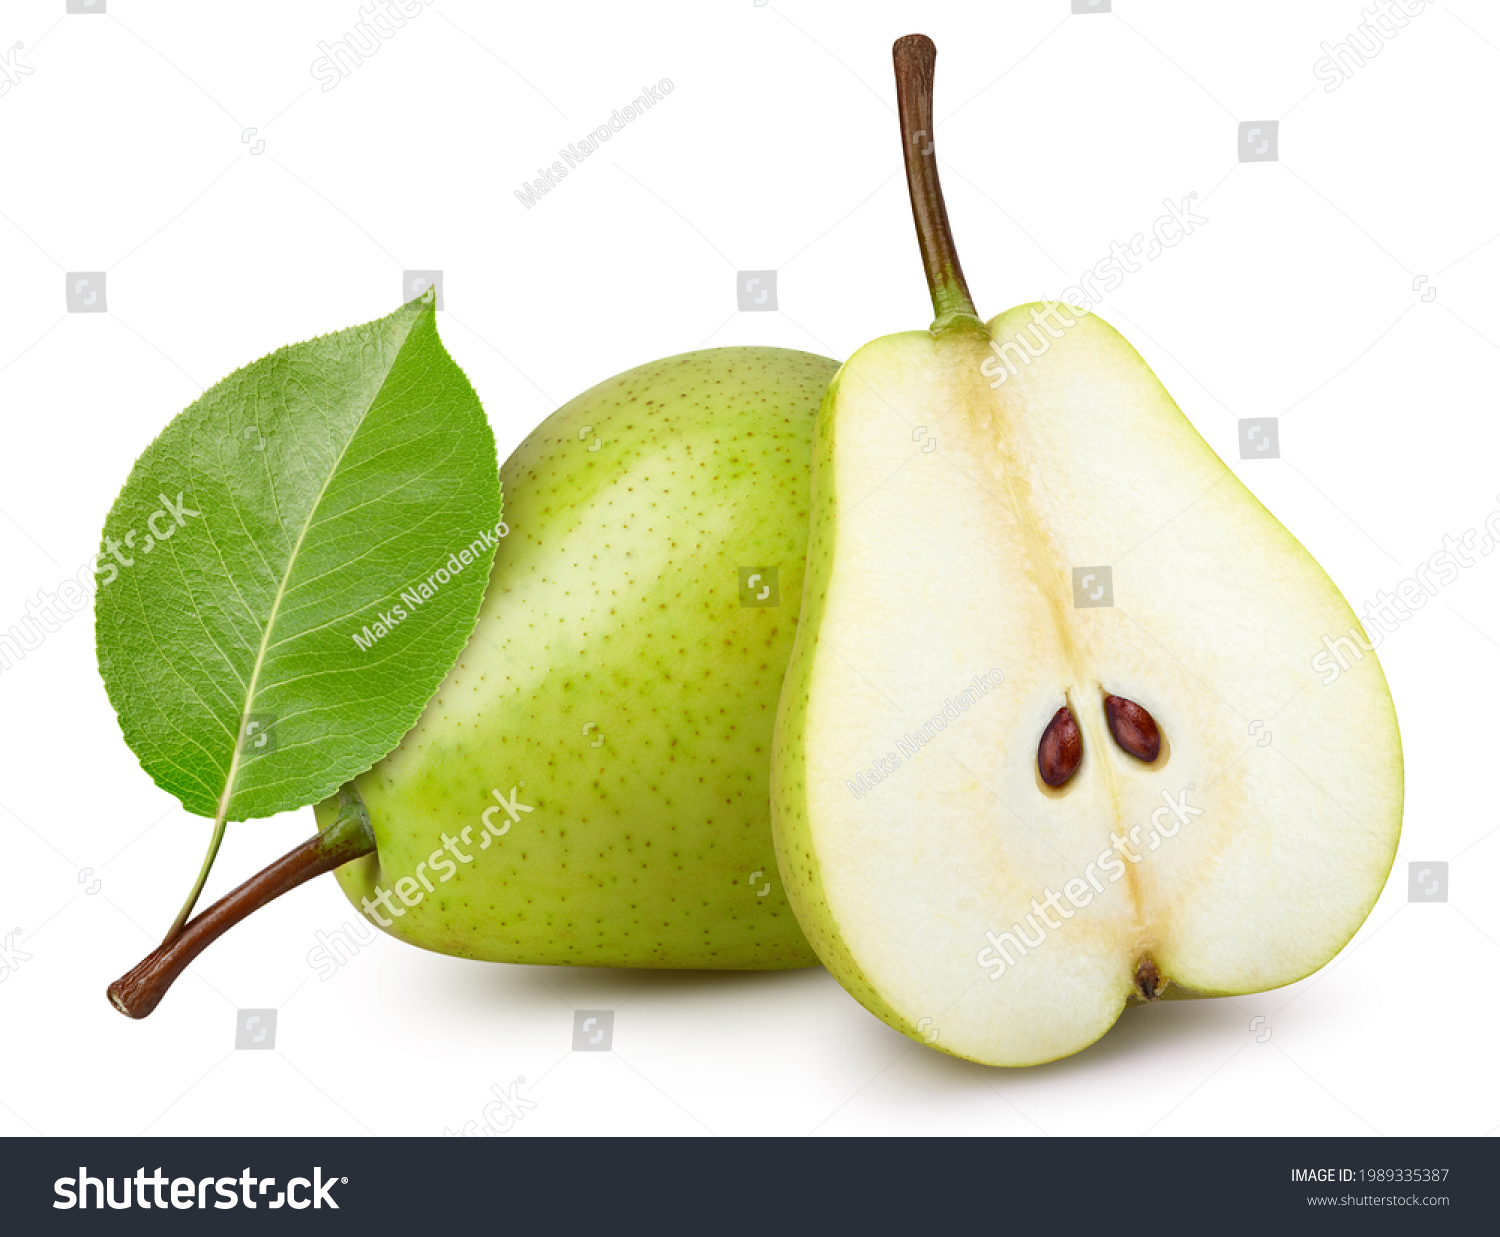 Pear fruit with pear leaf isolated on white background. Pear clipping path. Professional studio macro shooting #1989335387